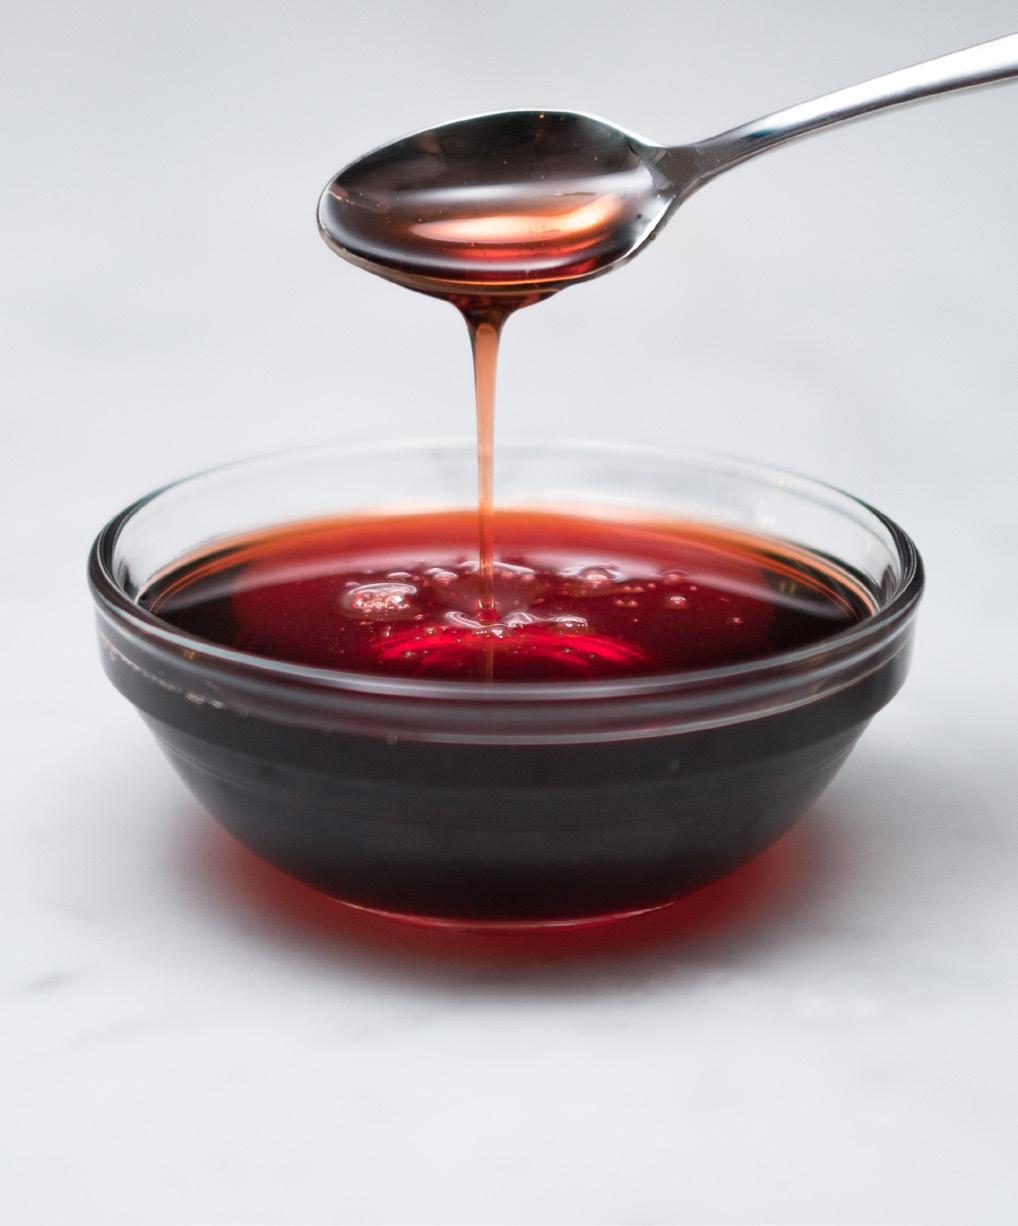 Alone, the plum-red liquid has the consistency of maple syrup and carries a pleasant, tart-cherry flavor that resembles pomegranate molasses.